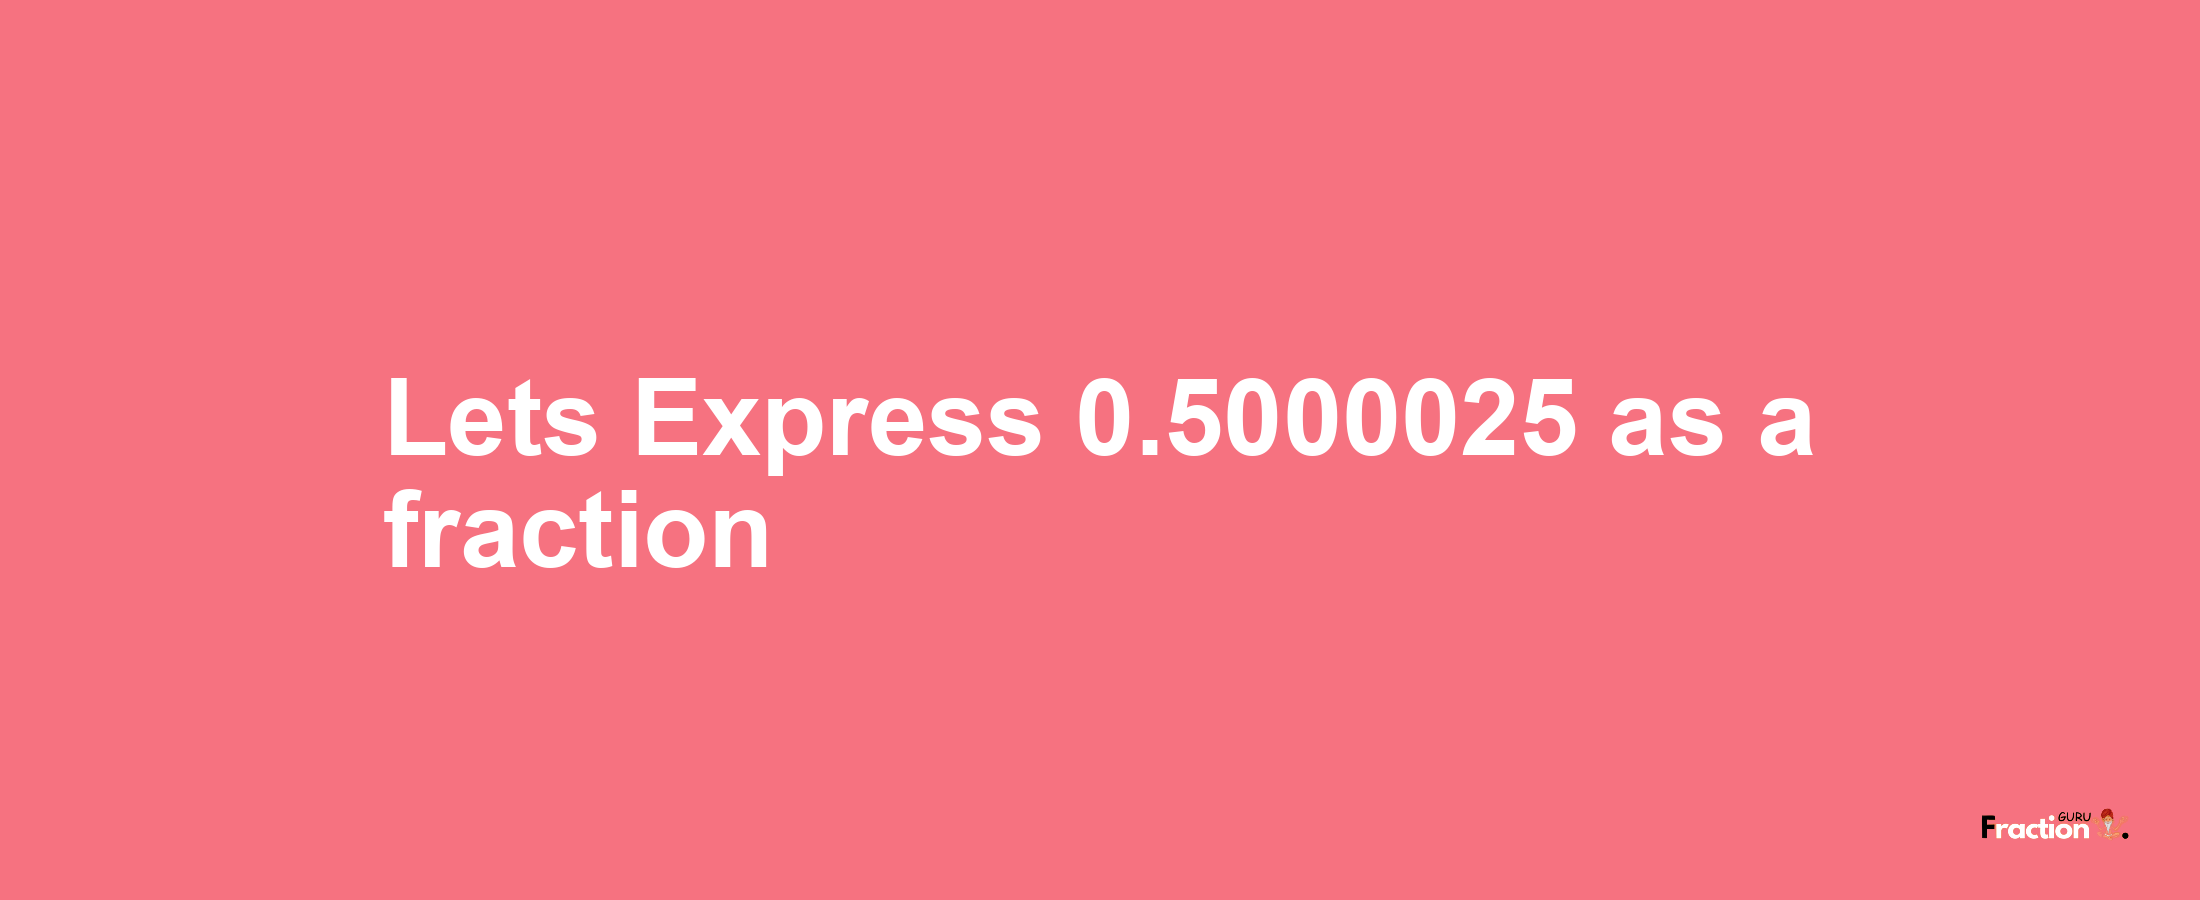 Lets Express 0.5000025 as afraction